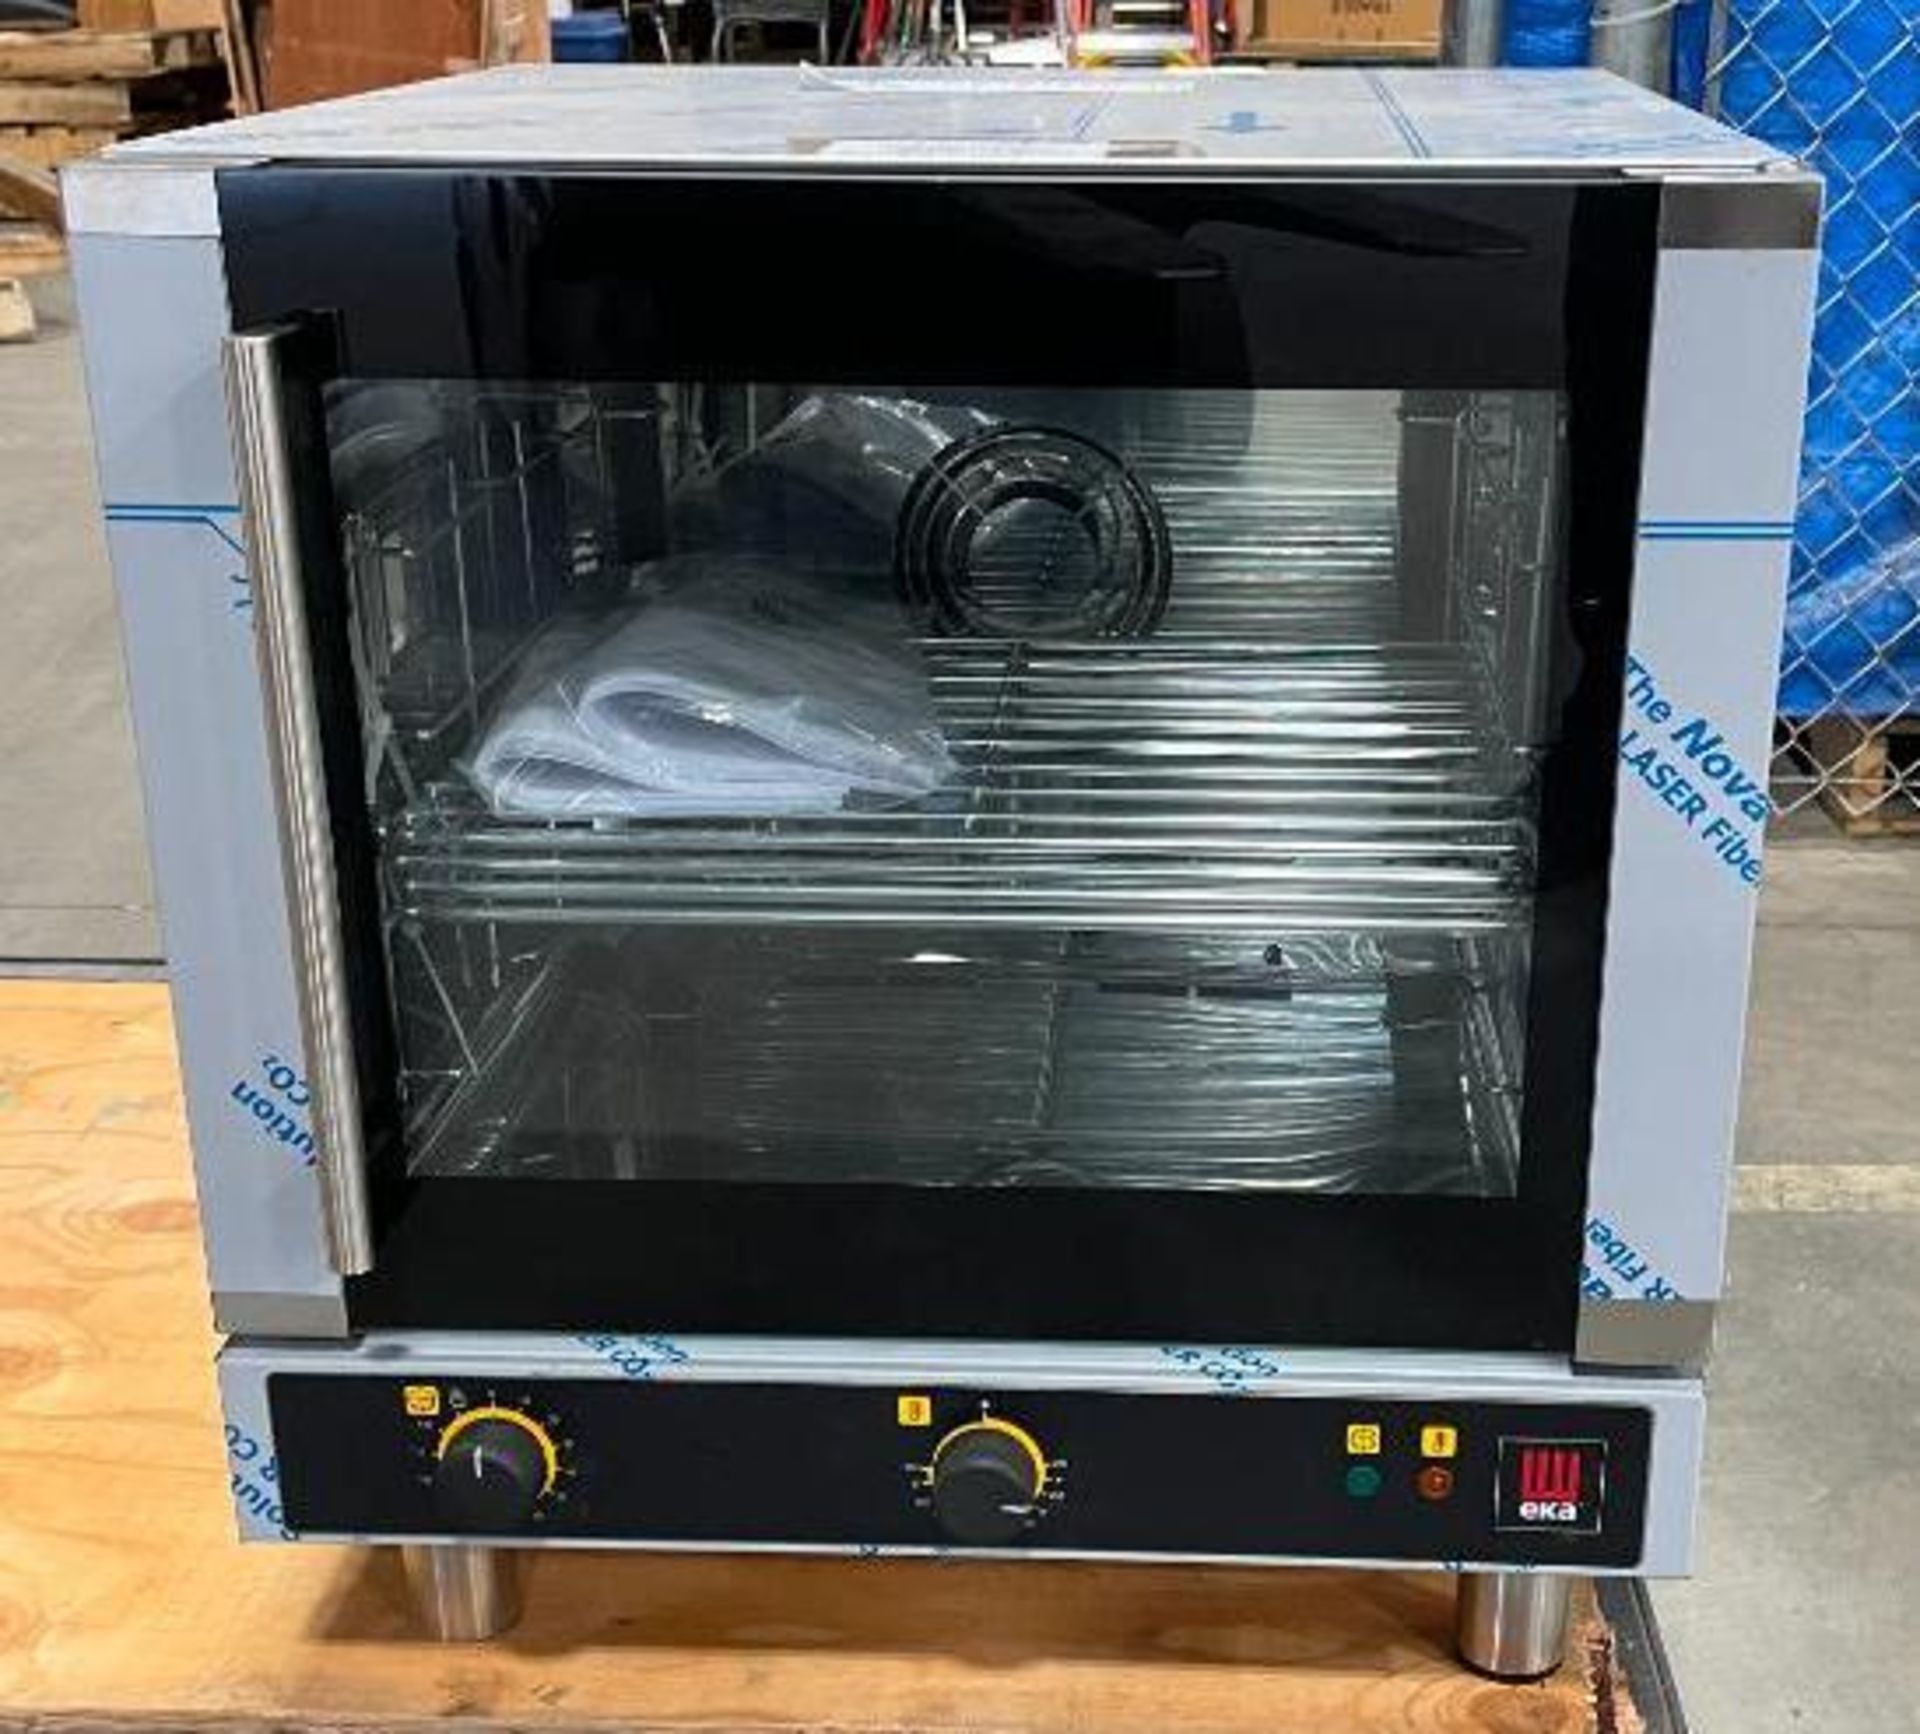 NEW EKFA-412 AL HALF SIZE ELECTRIC CONVECTION OVEN, 208V/1 PHASE - Image 9 of 16